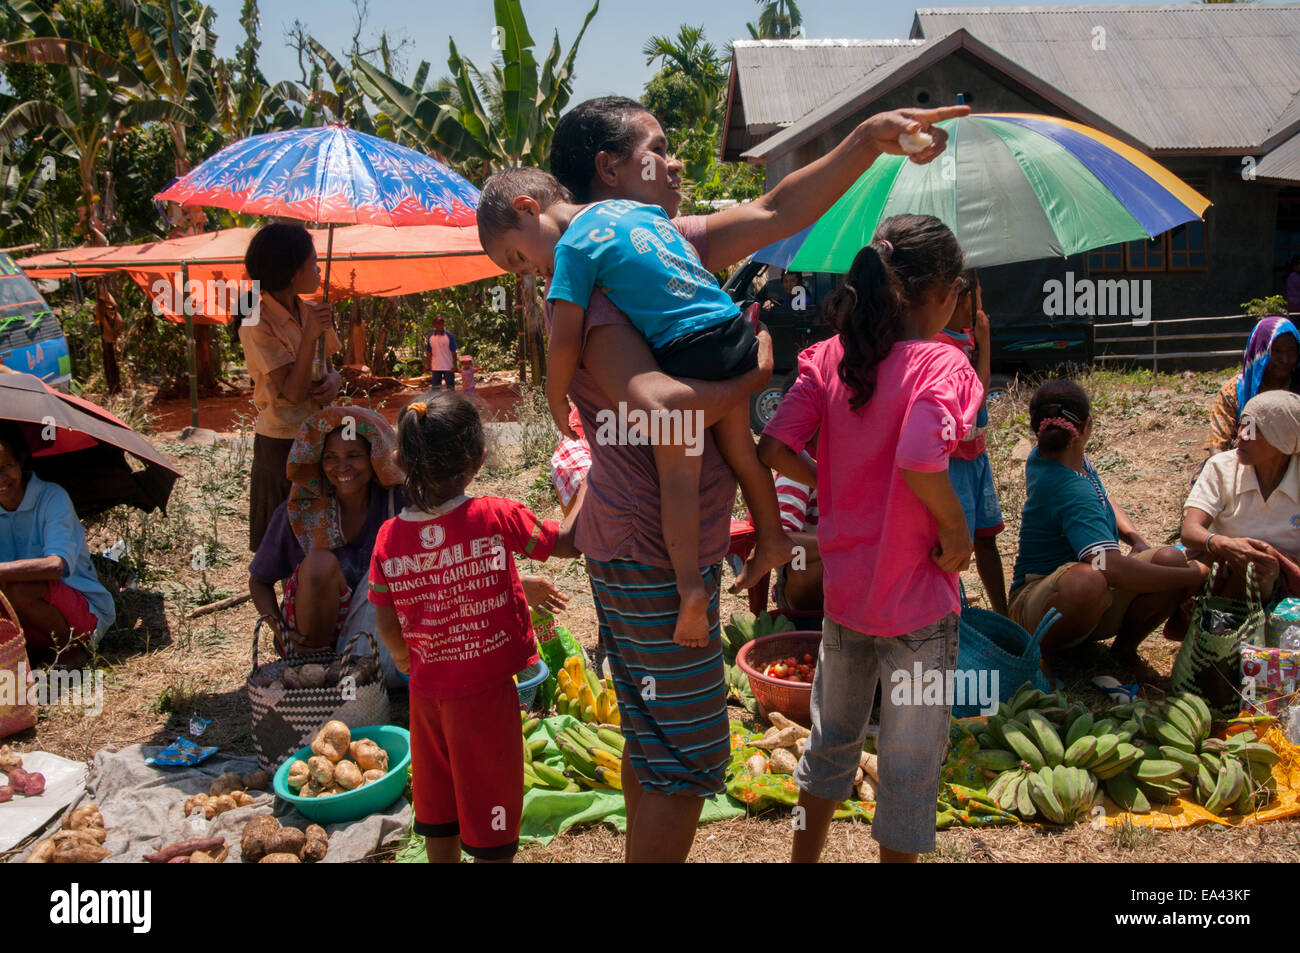 A woman carries her sleeping child at a barter market in Lembata Island, Indonesia. Stock Photo